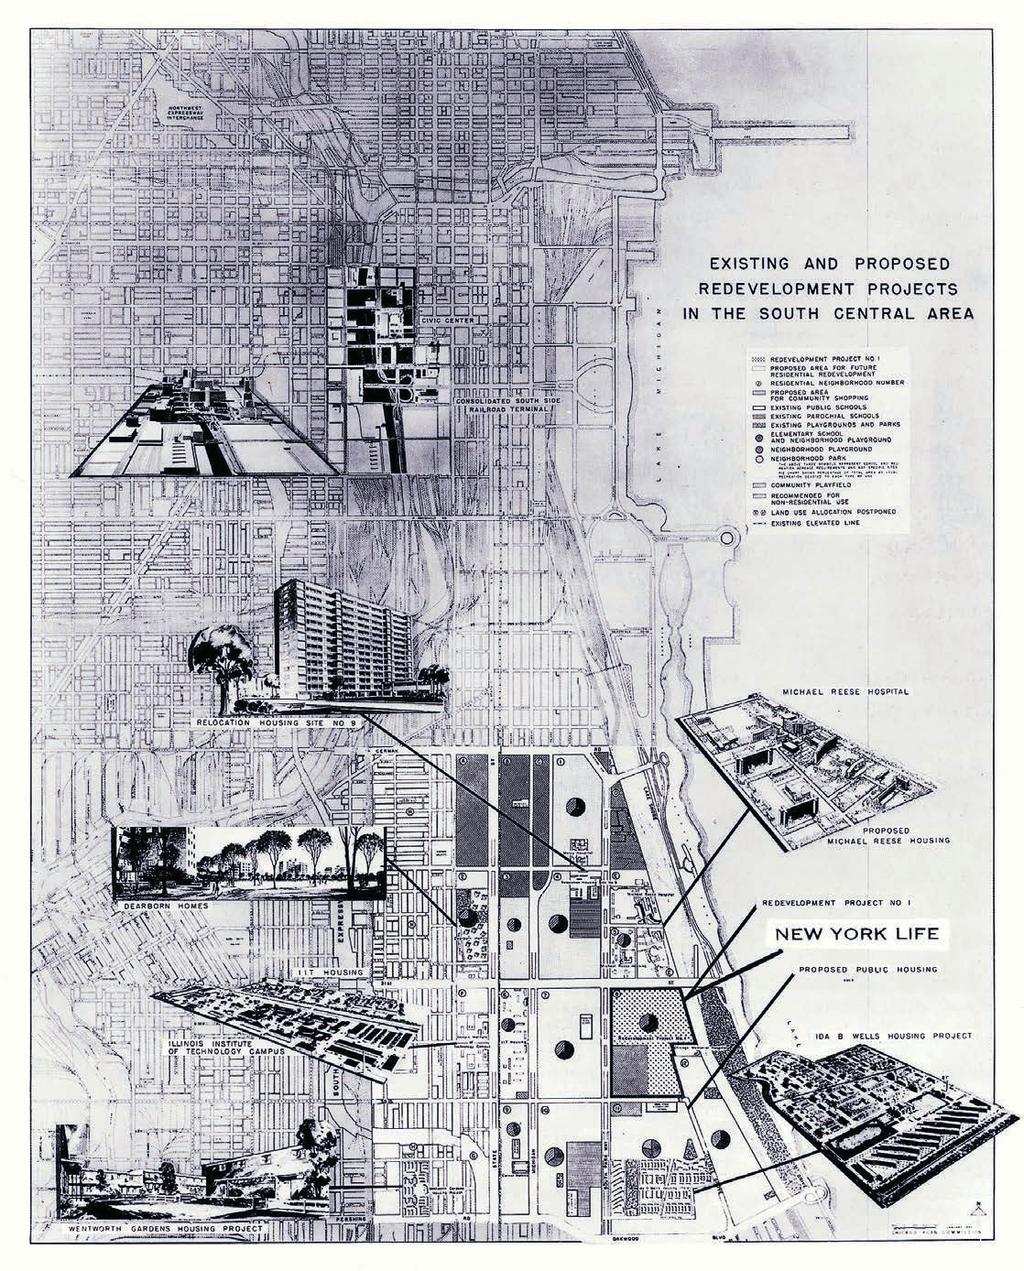 IIT AND SOUTH SIDE REDEVELOPMENT PLAN and closed spaces proved effective to organize the different redevelopment plans of the independent institutions operating in Chicago South Side, while keeping